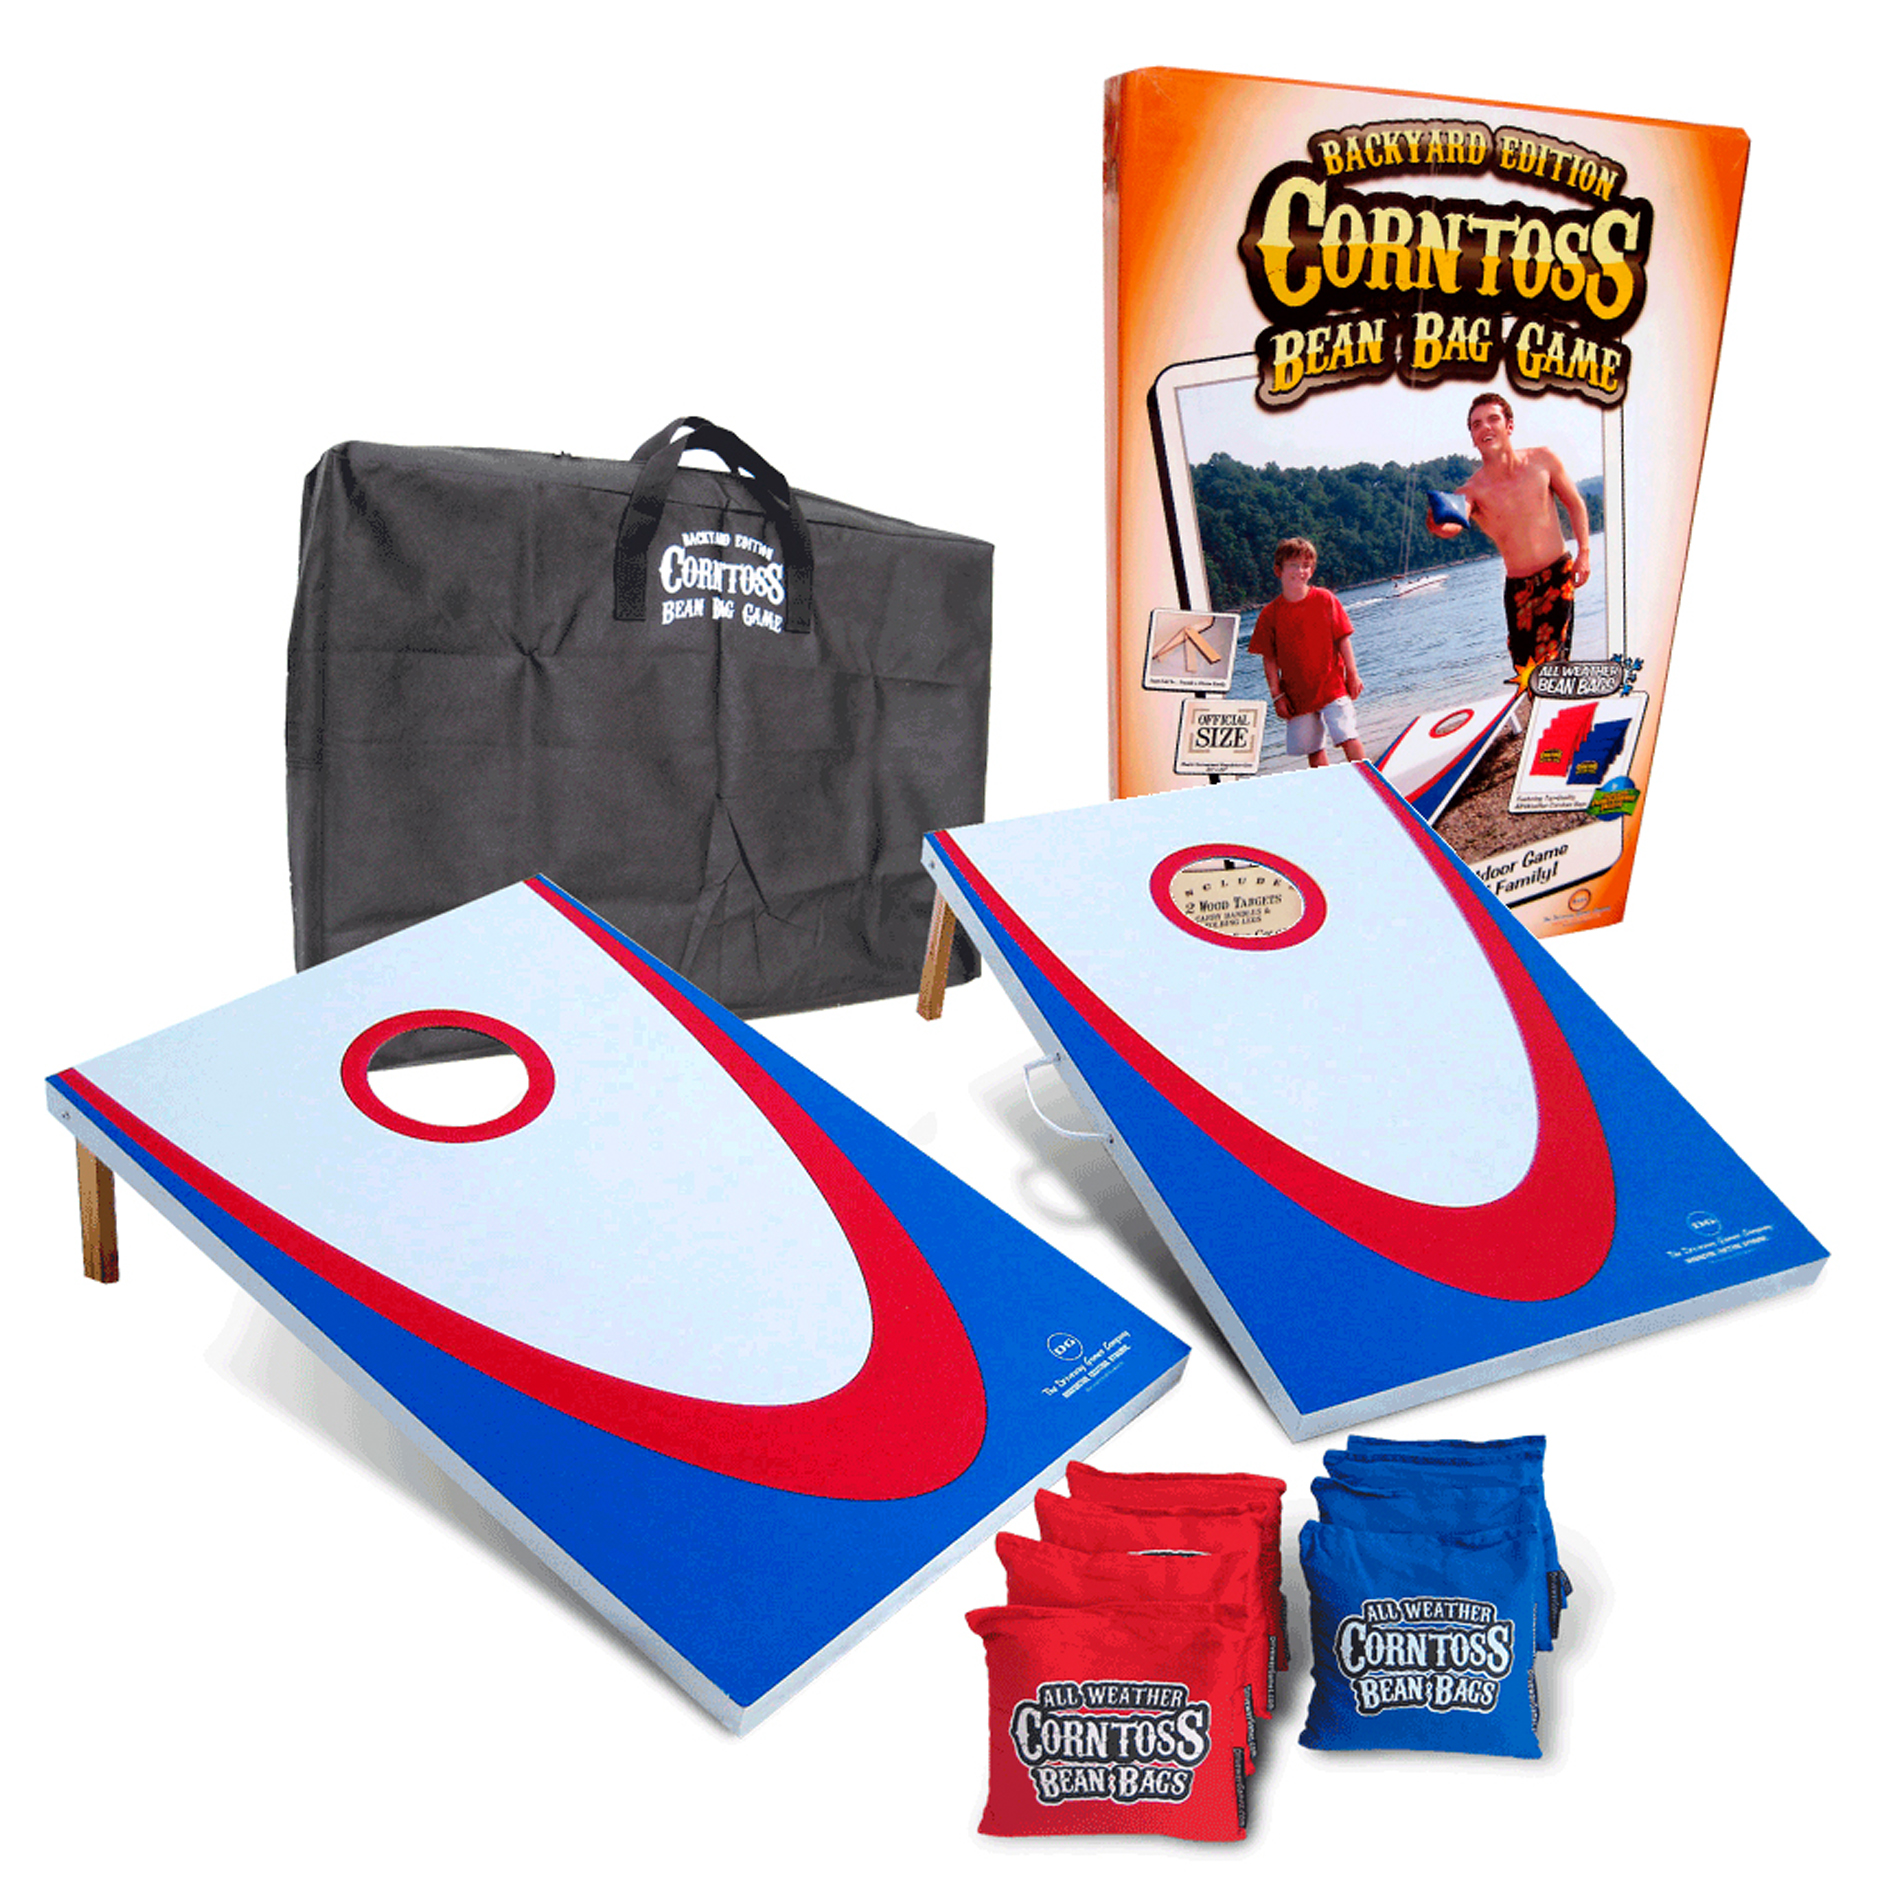 Driveway Games Corntoss Bean Bag Game with Case